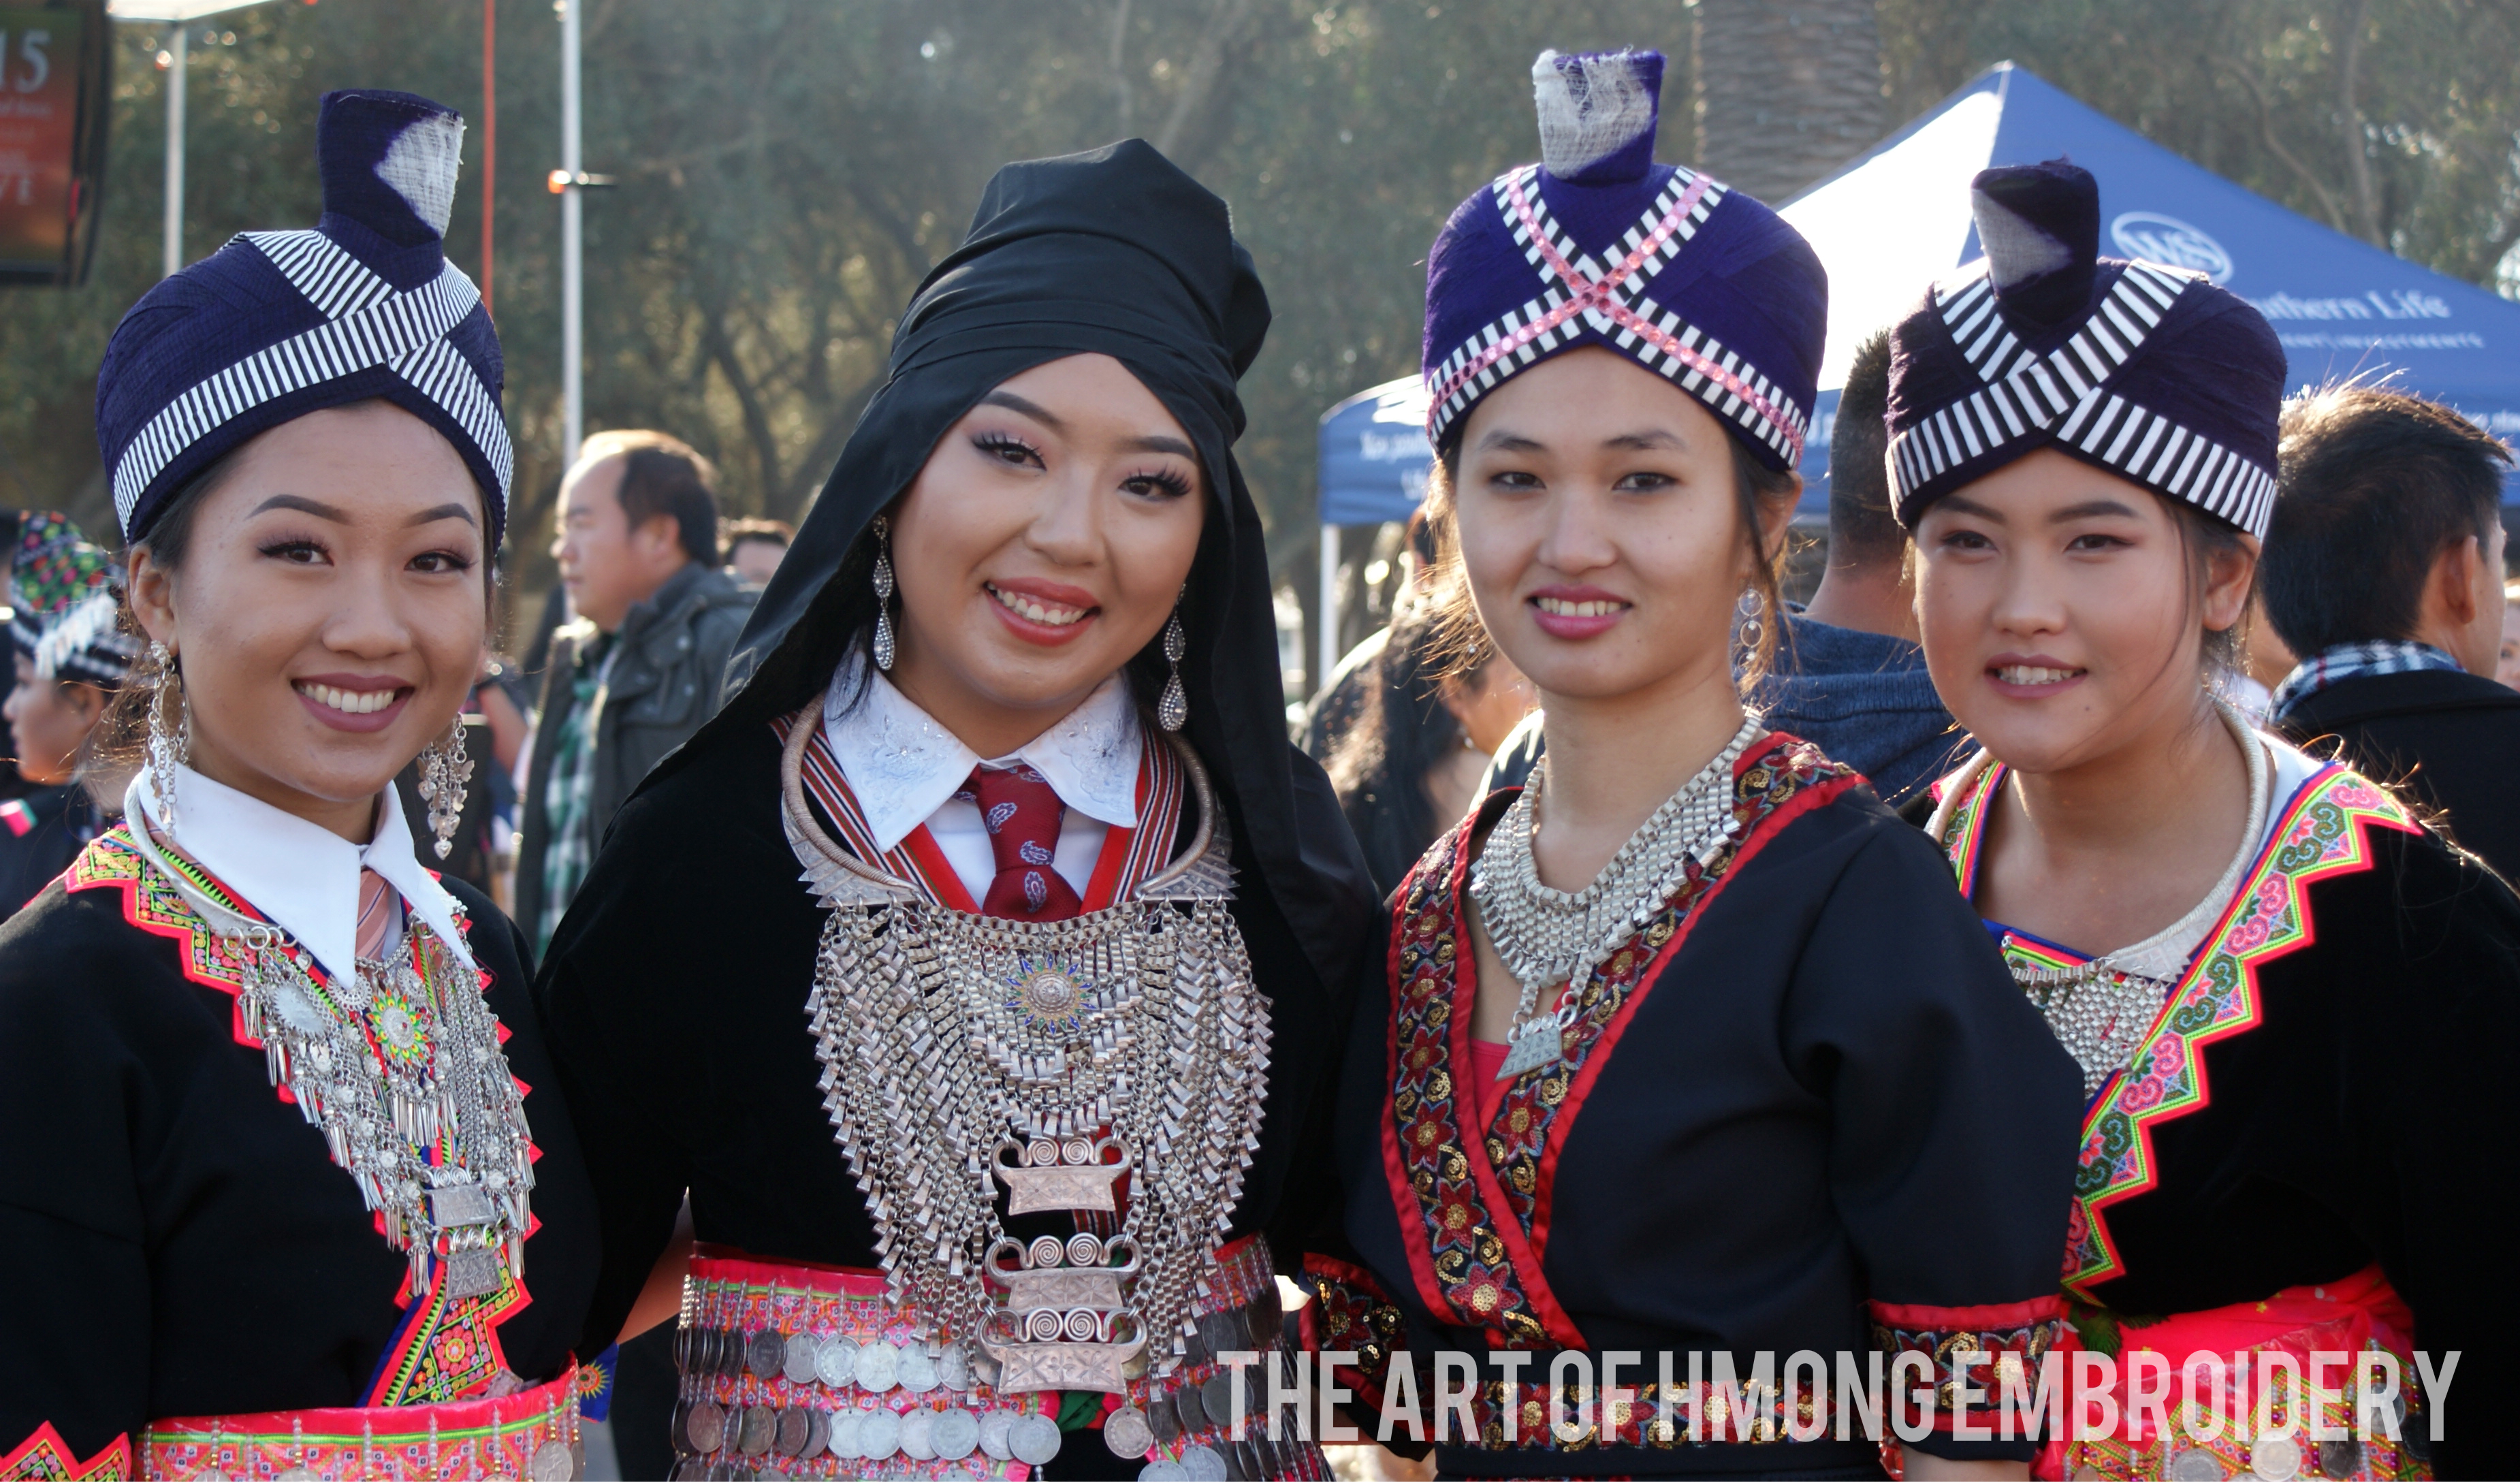 Hmong S Hmong Clothing The Of Hmong Embroidery.